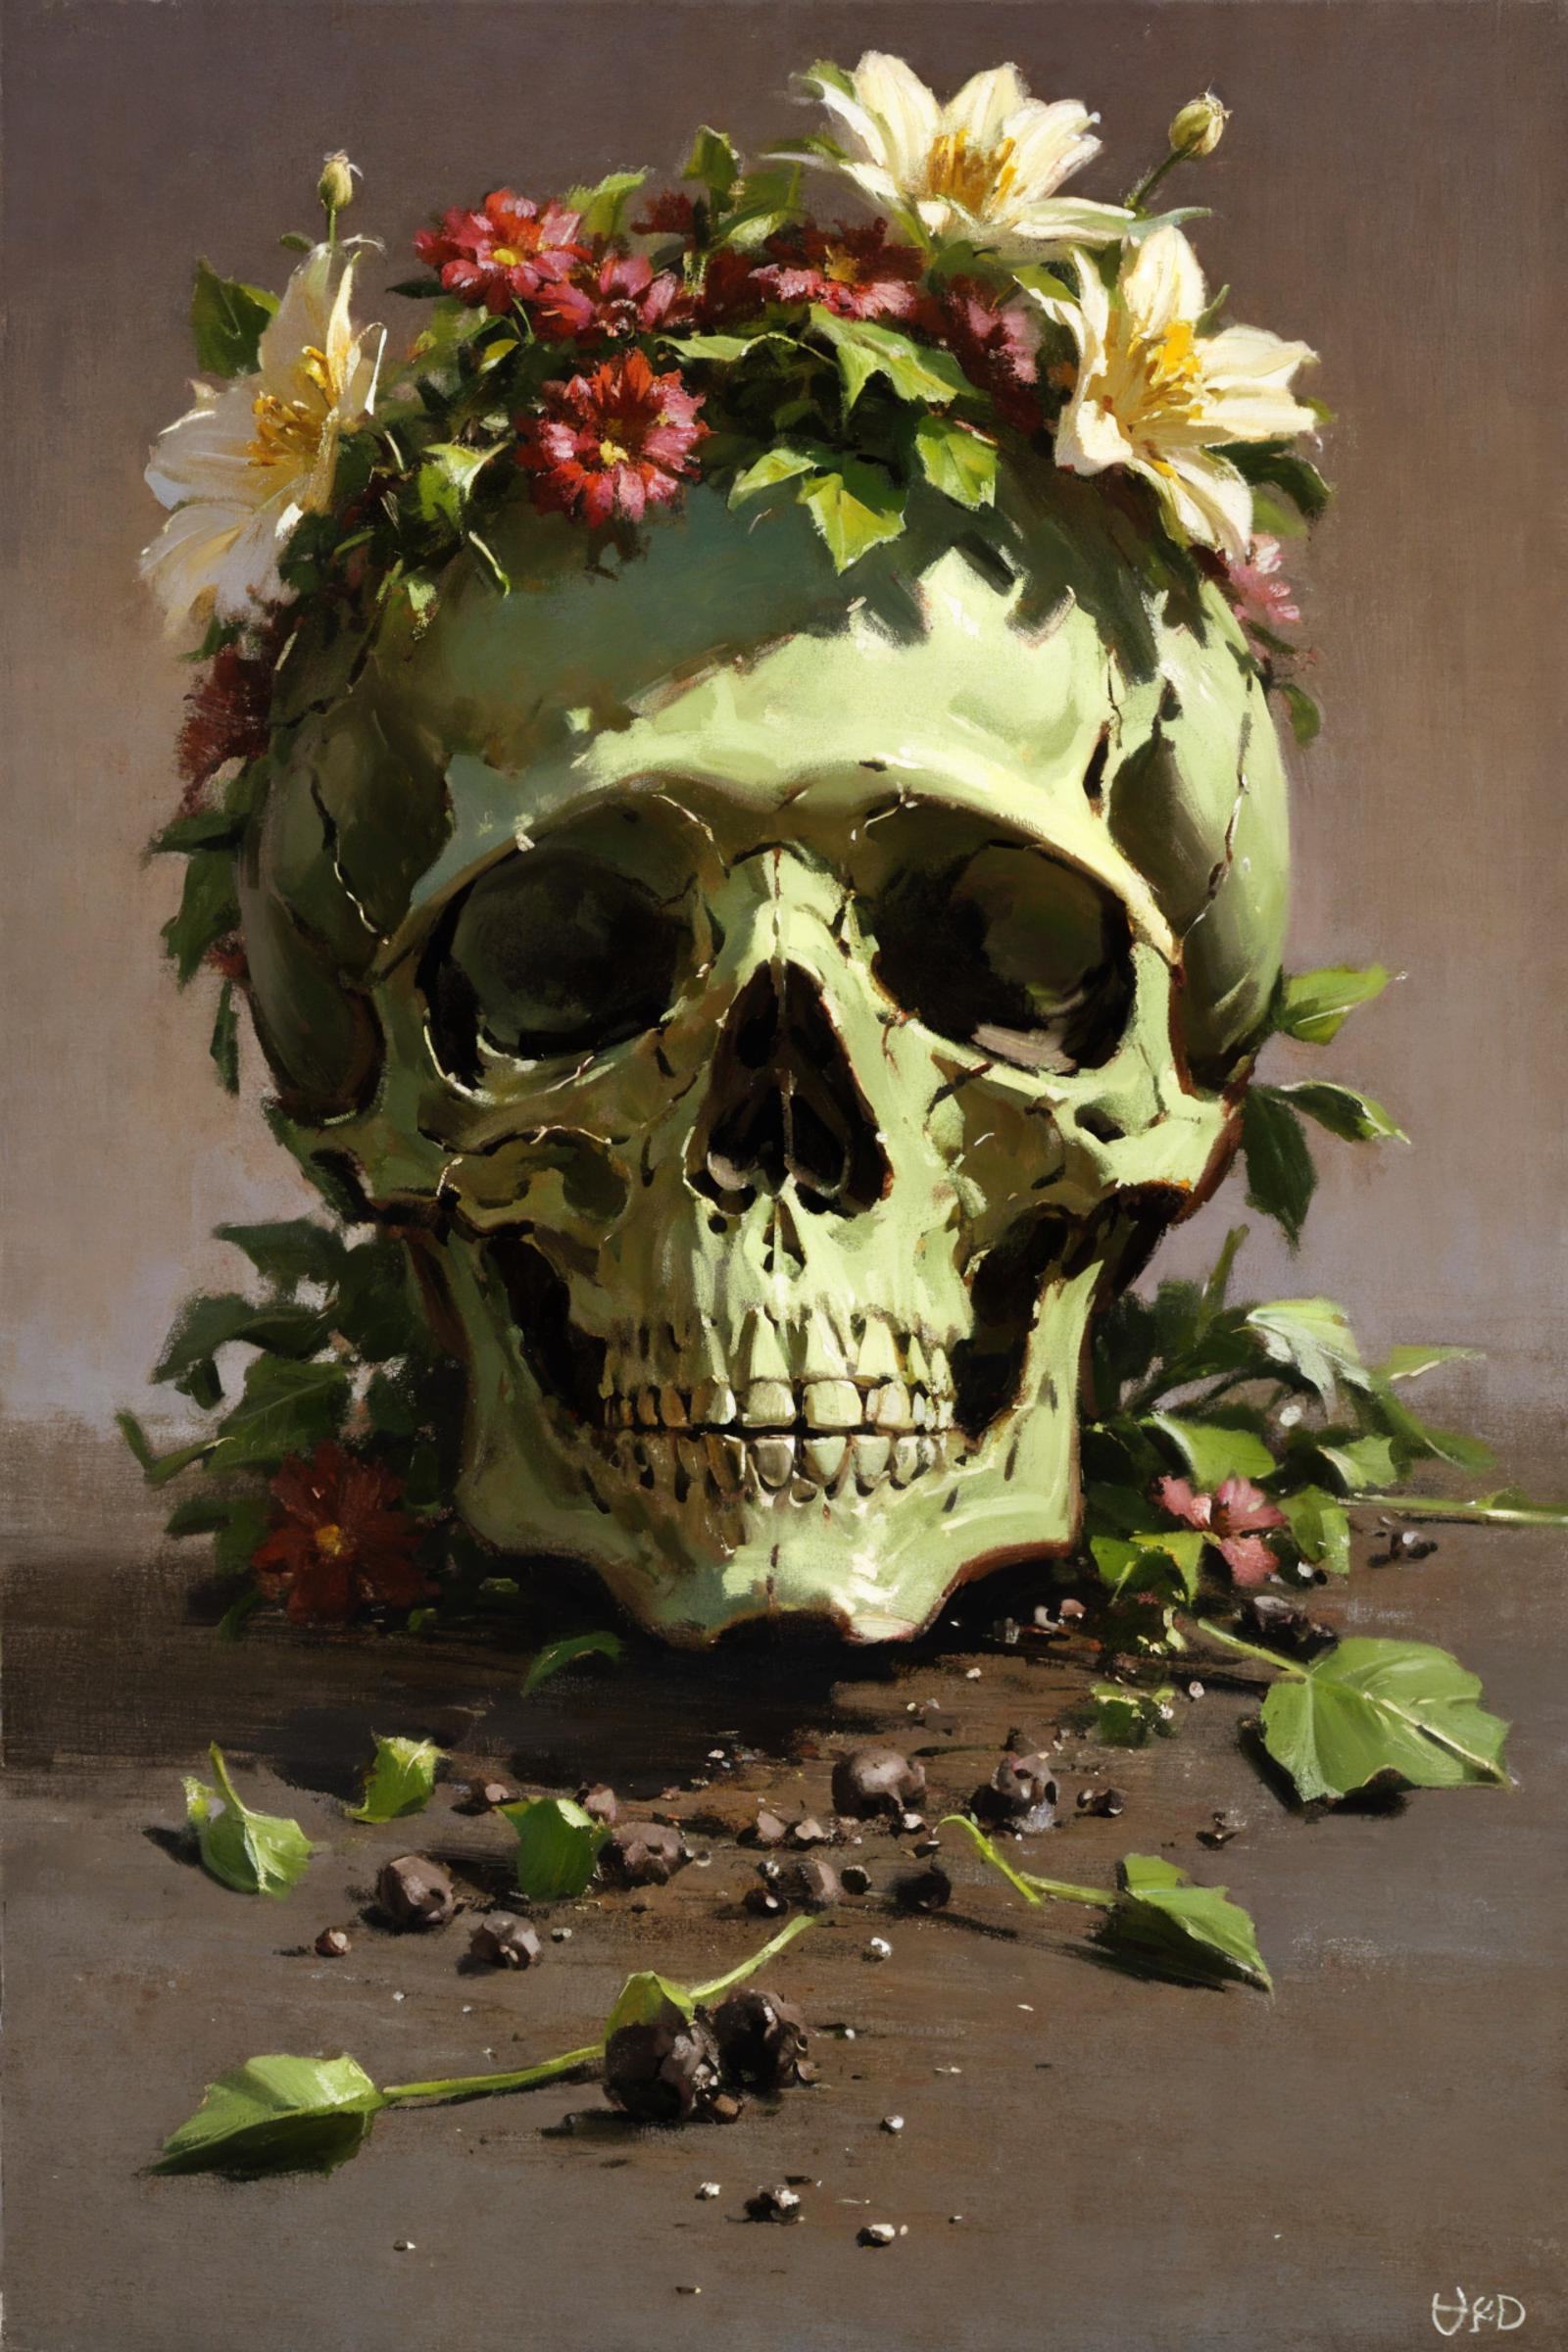 A large skull with a crown of flowers and green leaves on top.